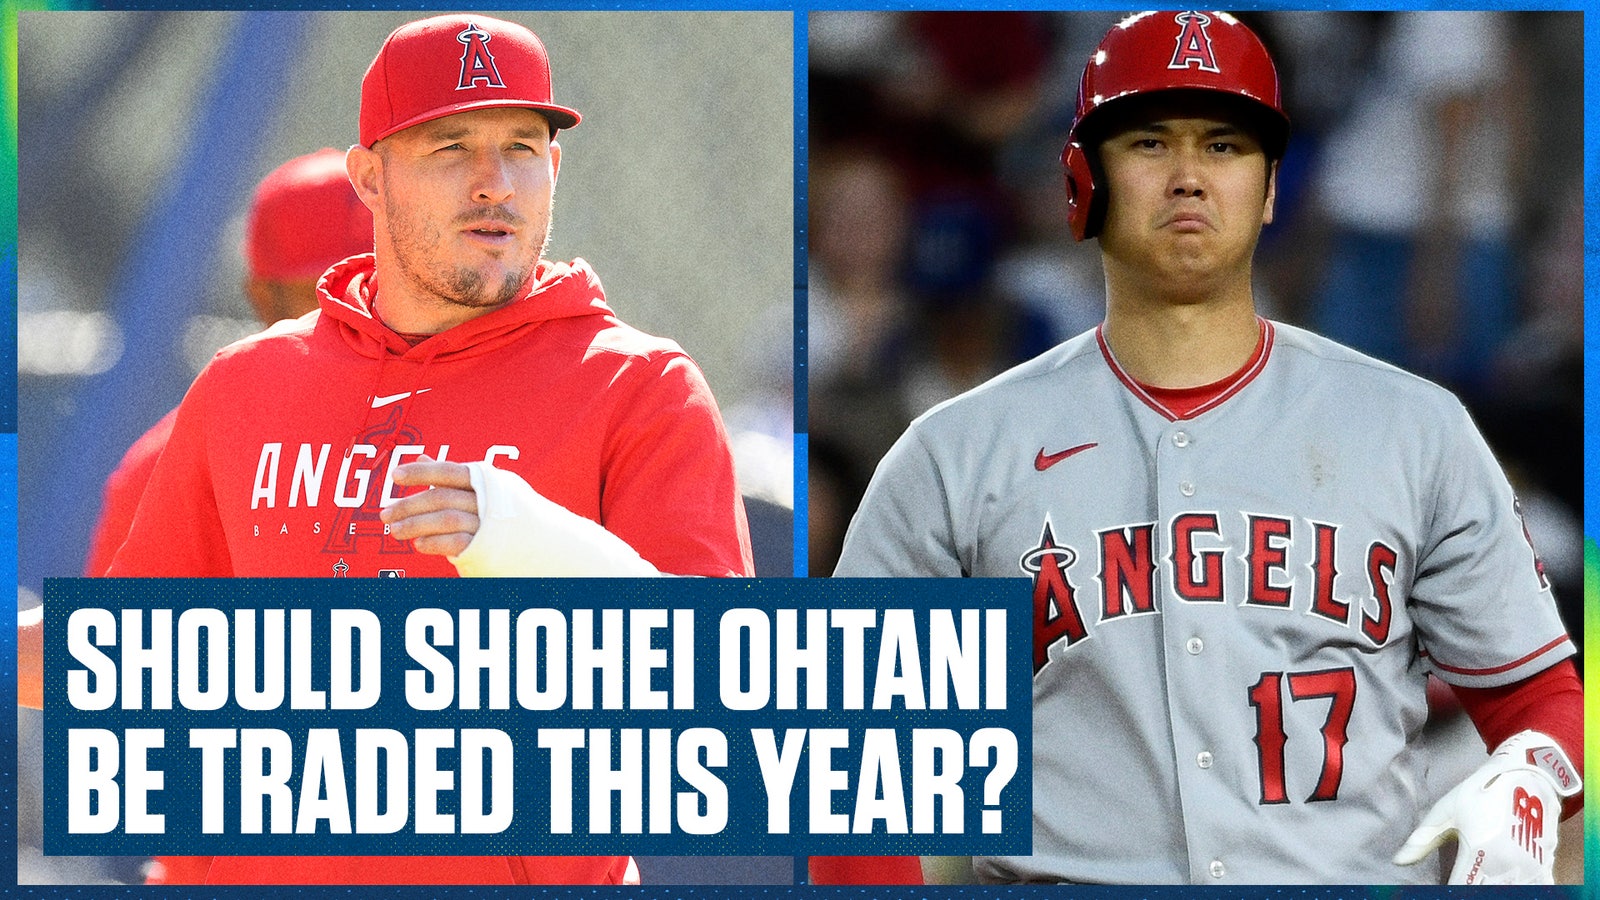 John Smoltz on whether Shohei Ohtani should be traded at the deadline.